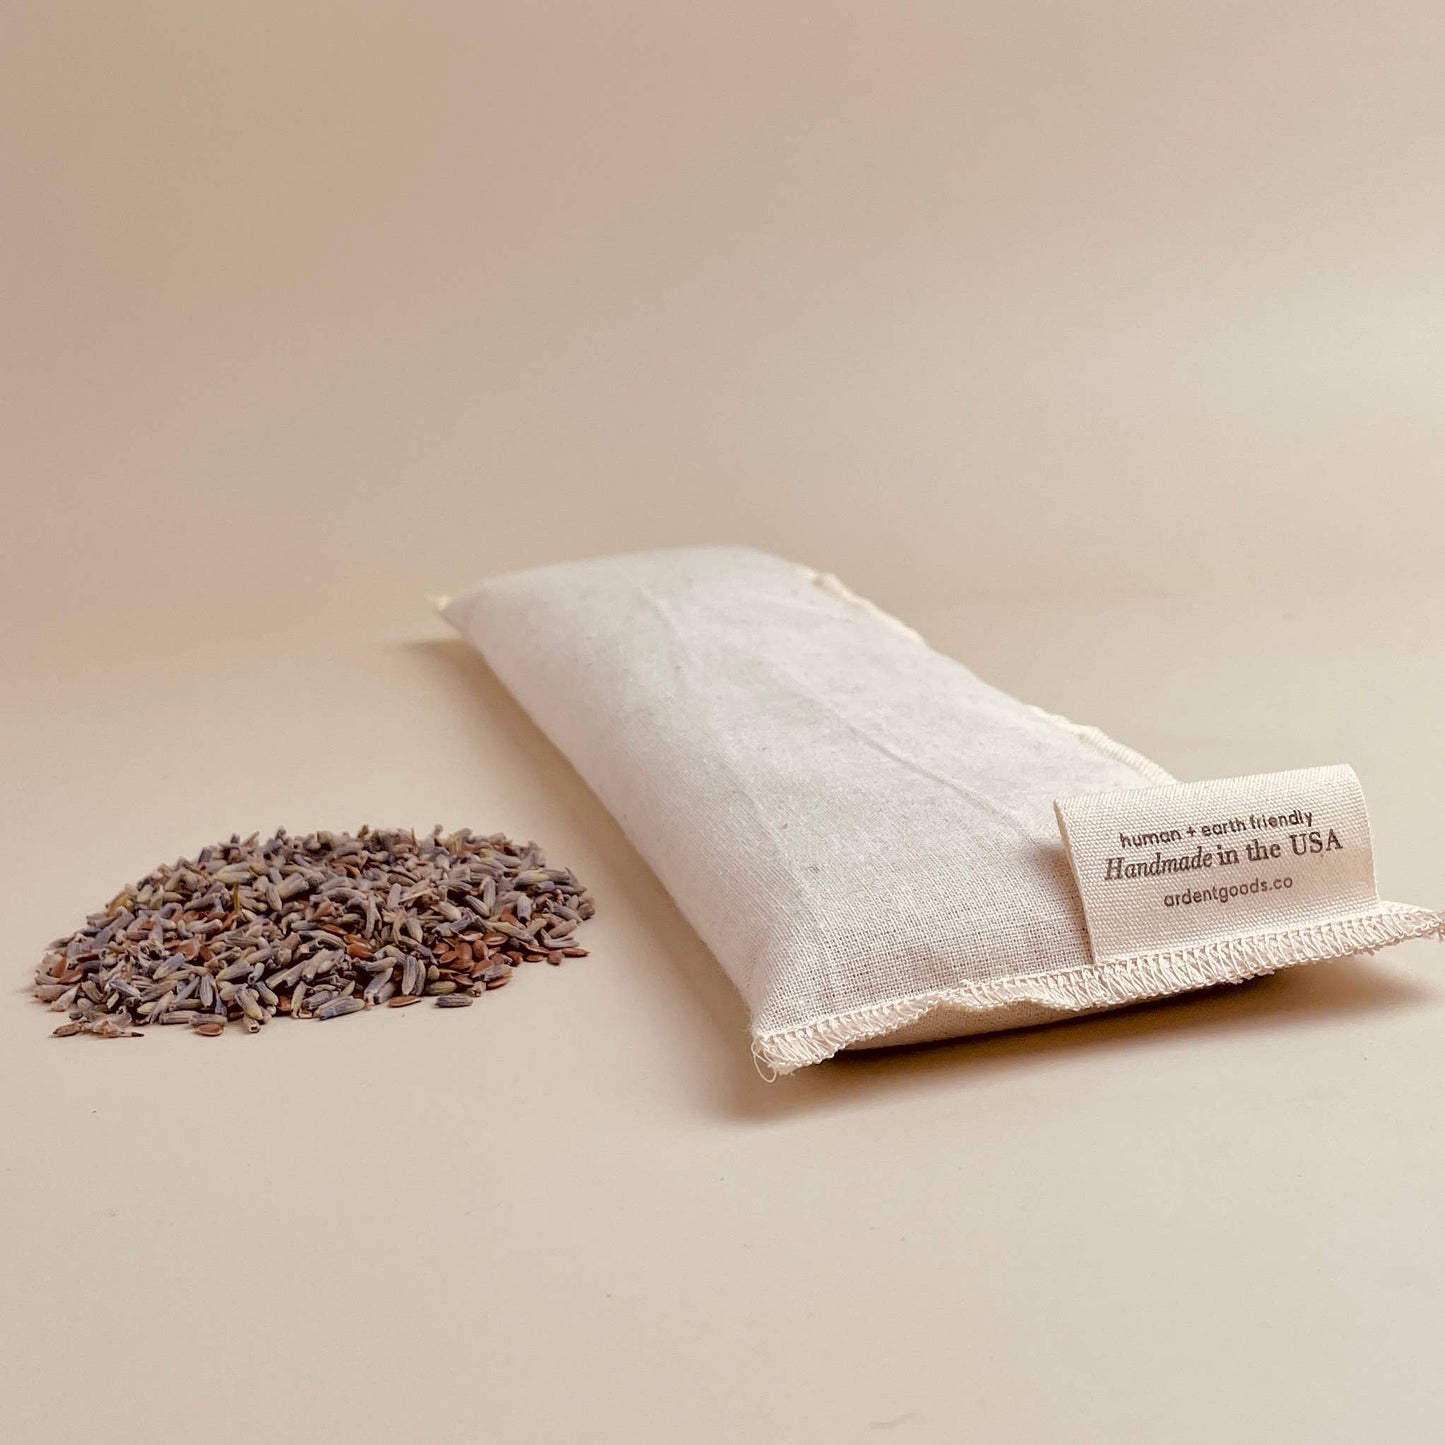 Relax puffy eyes and relieve stress using Ardent Goods handmade lavender eye pillow filled with locally sourced lavender buds and flaxseeds. Natural ingredients help with relaxation without artificial fragrances or synthetic ingredients.